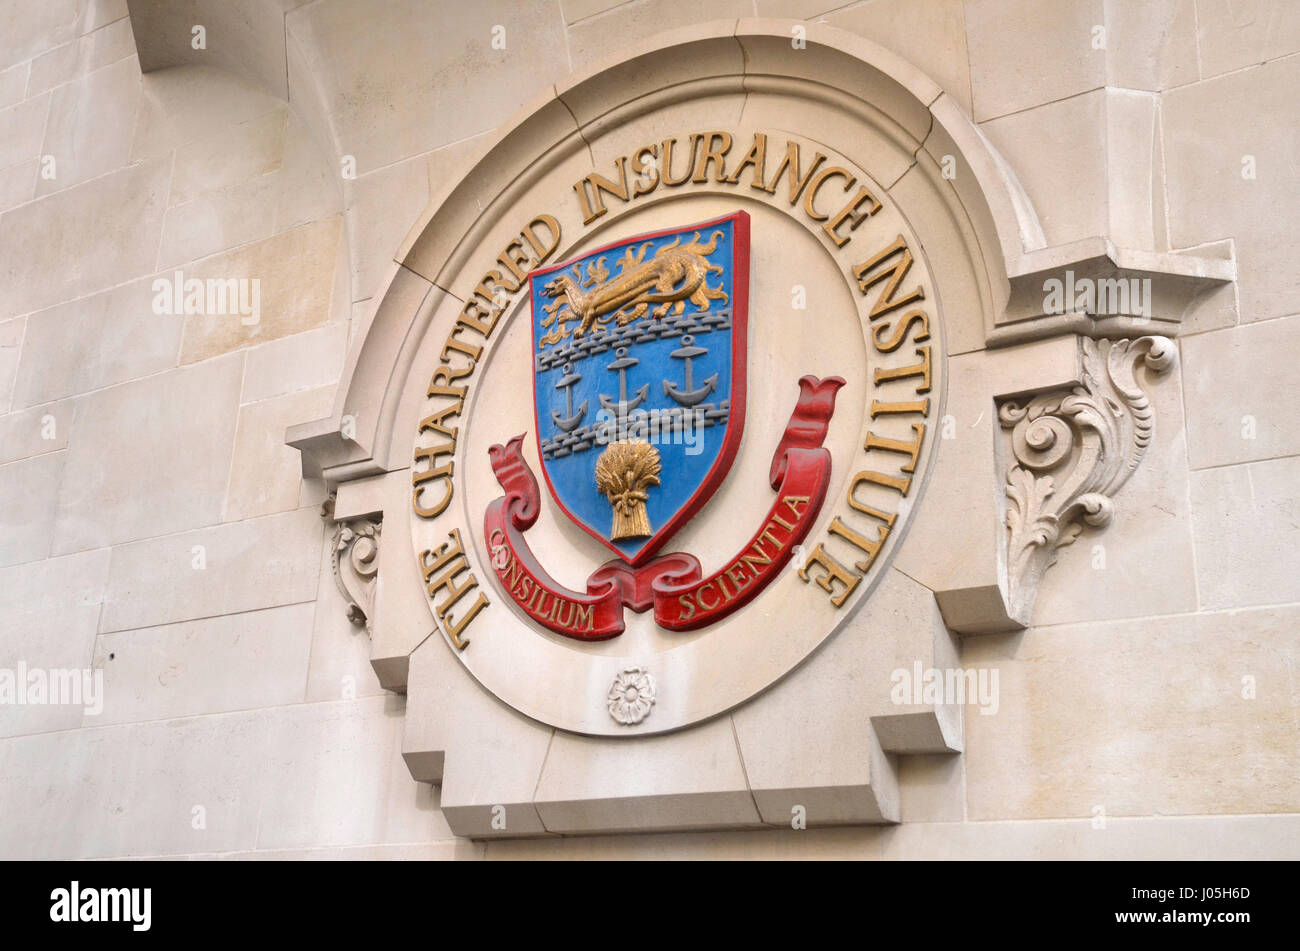 The emblem of the Chartered Insurance Institute in Aldermanbury, City of London Stock Photo